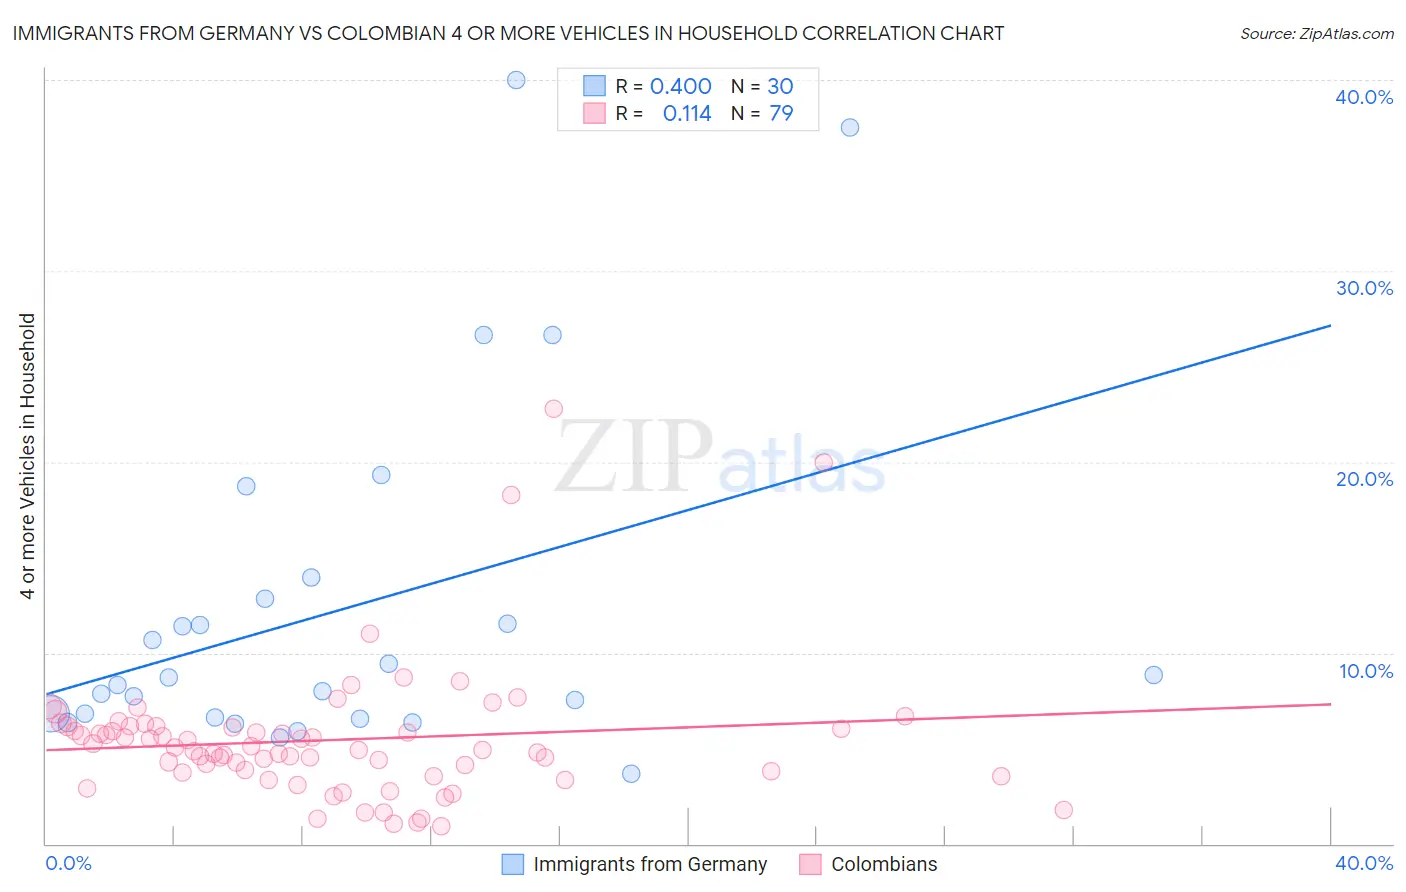 Immigrants from Germany vs Colombian 4 or more Vehicles in Household